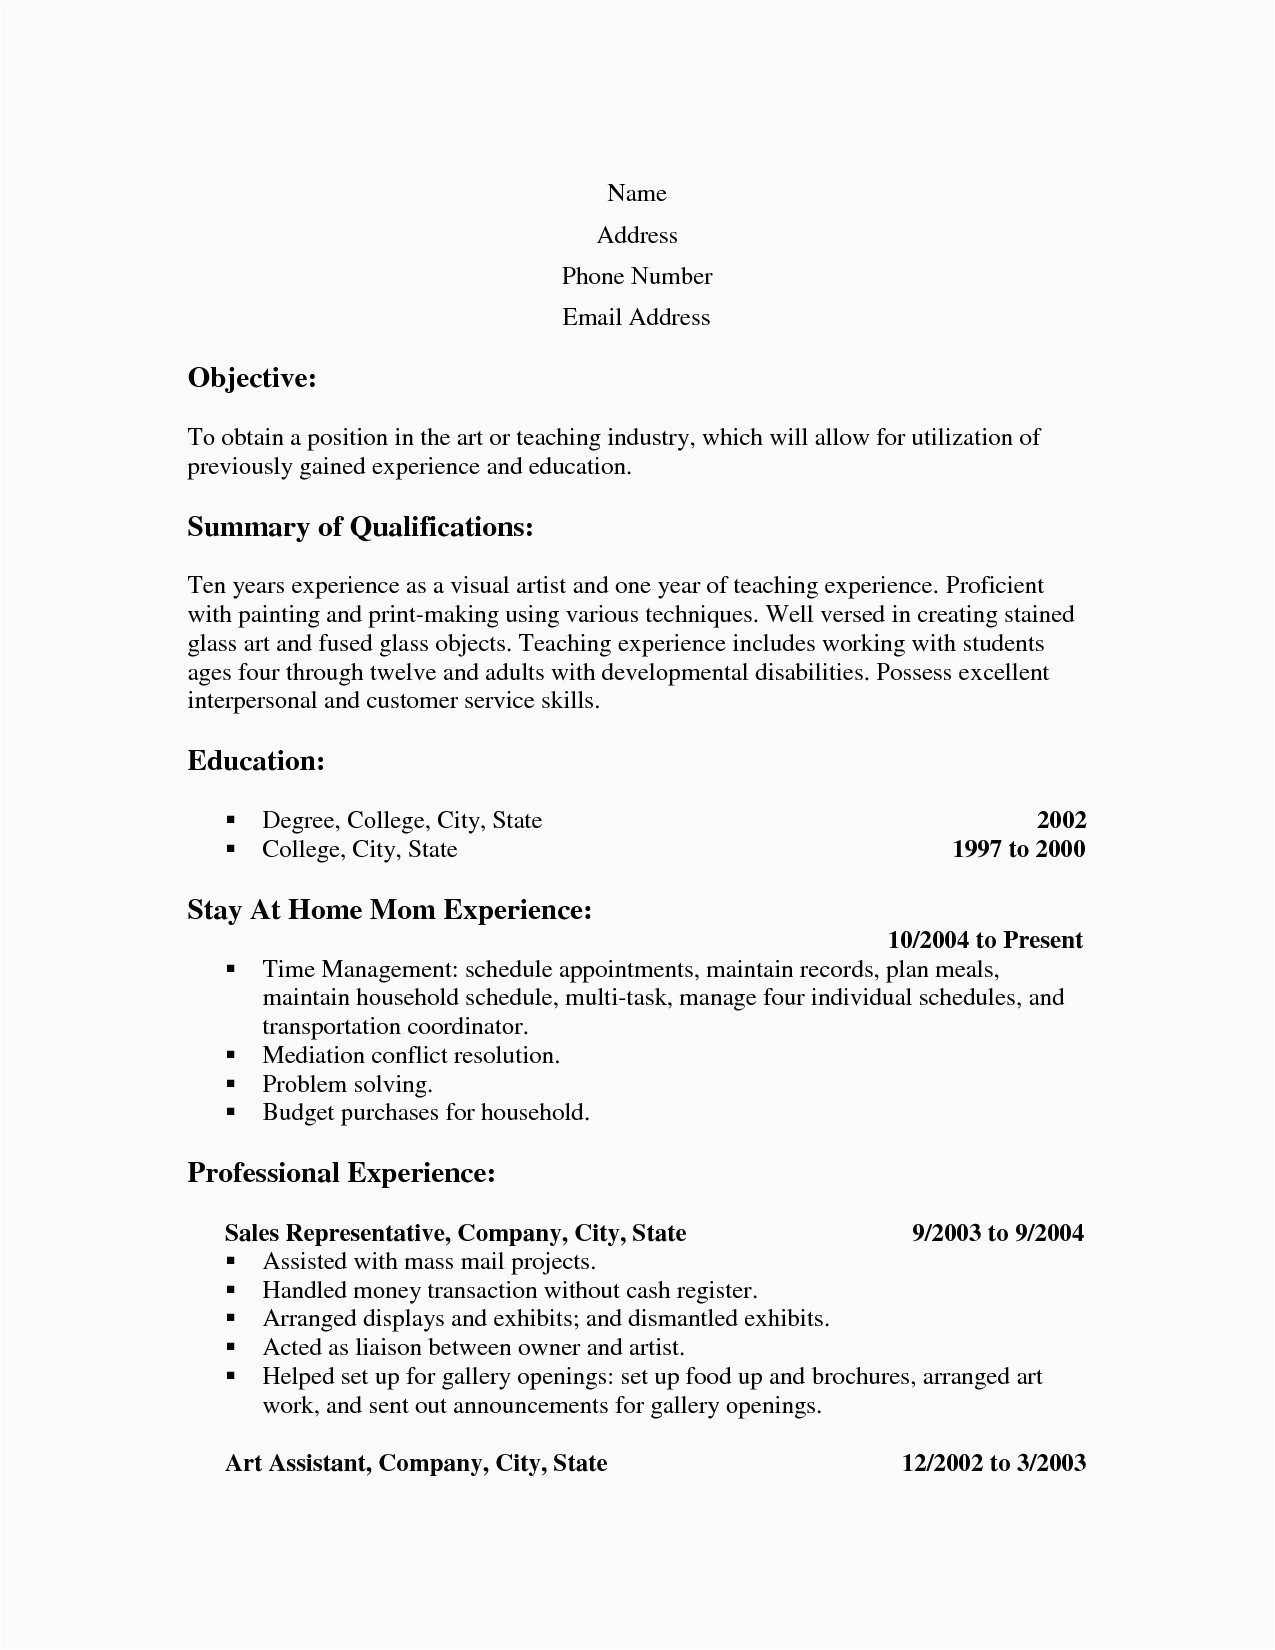 sample resume stay at home mom returning to work